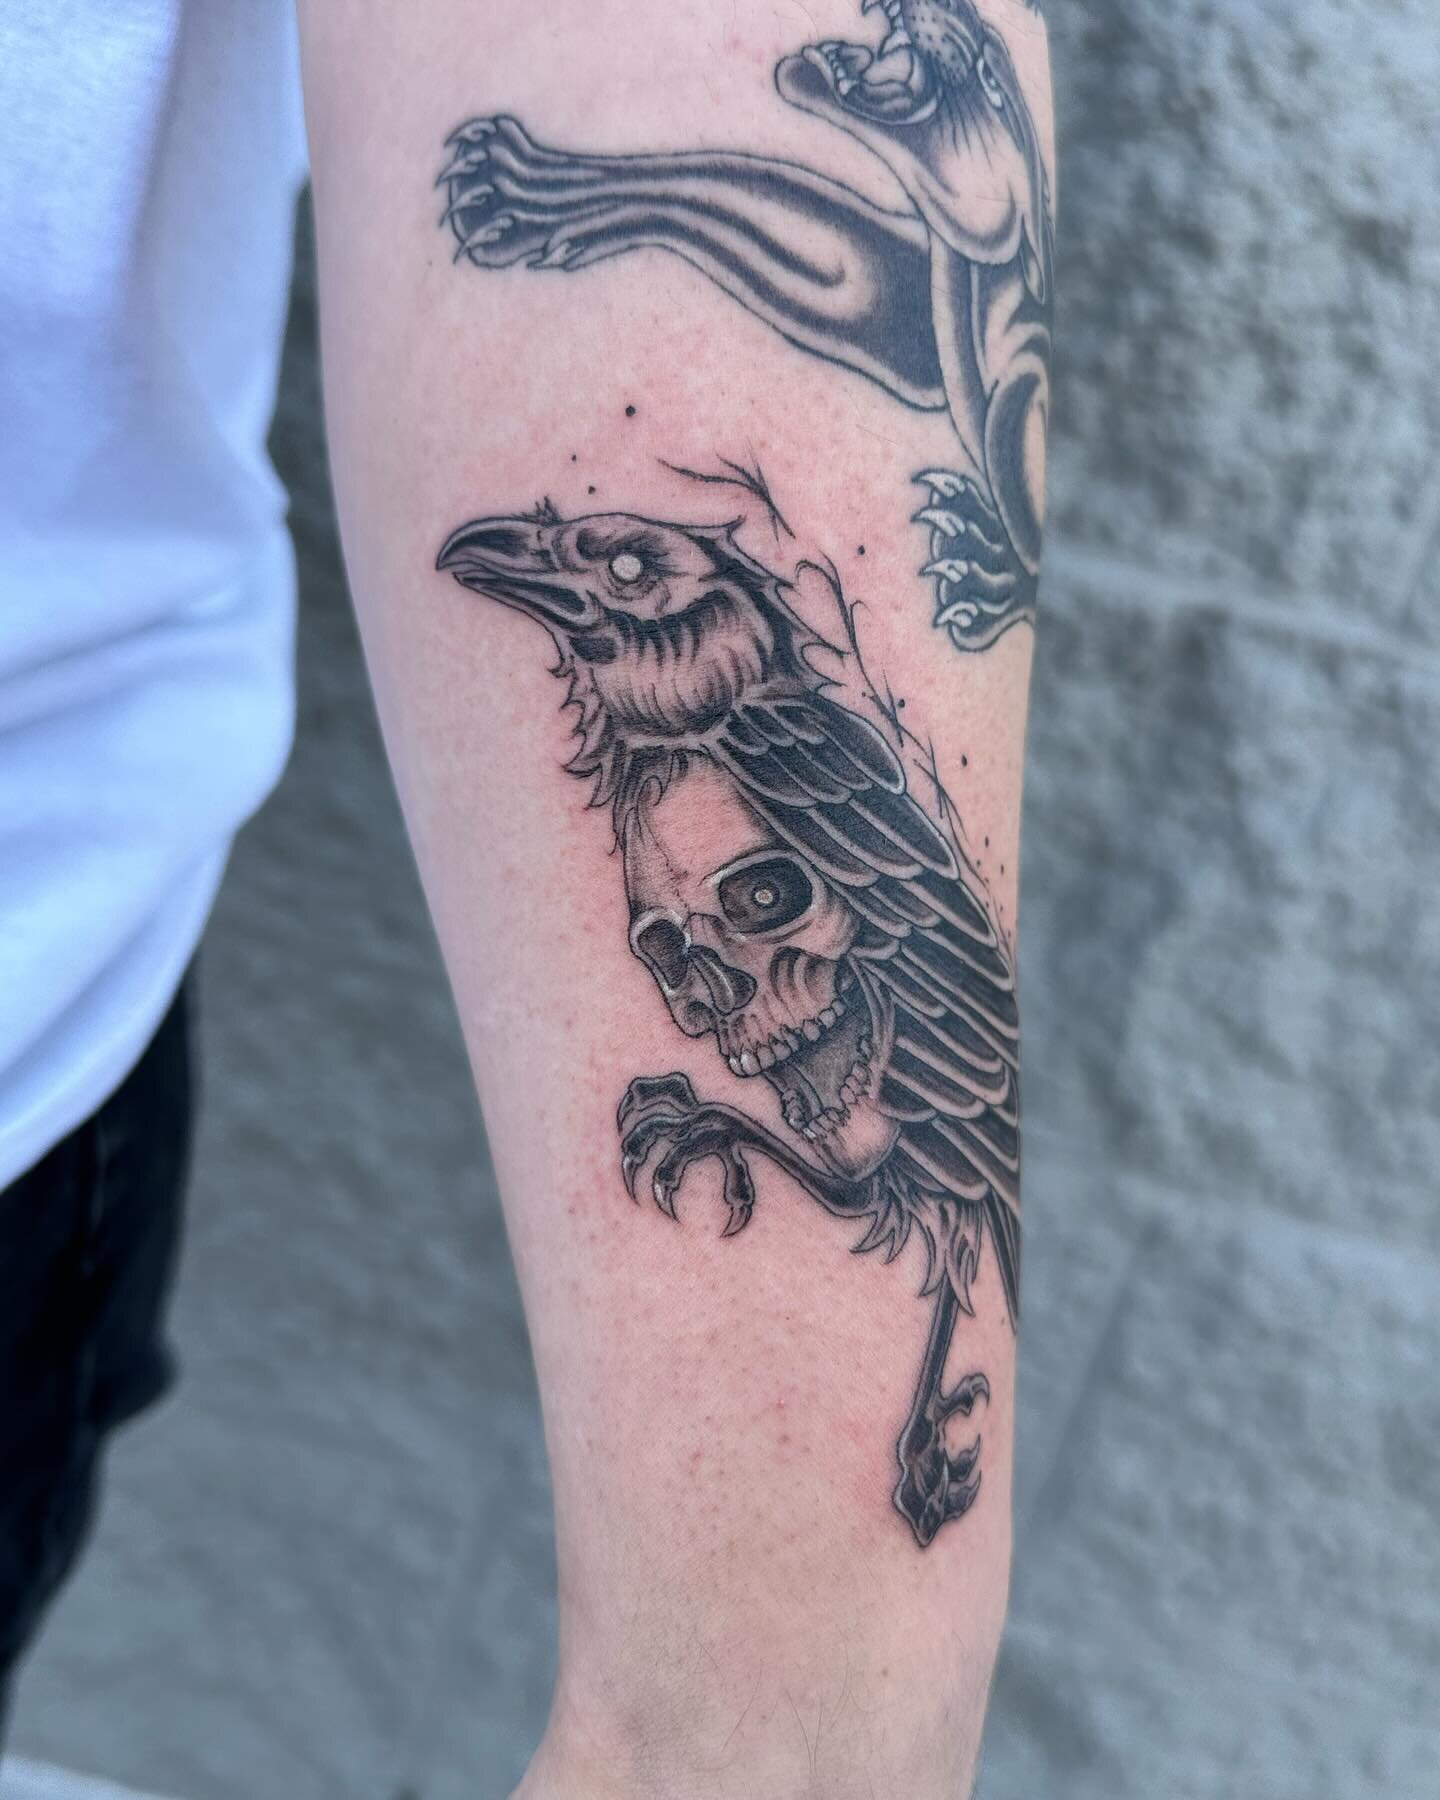 Creepy crow added to my client&rsquo;s Patchwork💥🐦&zwj;⬛ ft us shivering in 18 degree climate outside for the feed💀 #itsfuckingcold #blackandgrey #blackandgreytattoo #crow #crowtattoo #dynamic #arkansas #arkansastattooartists #rogersarkansas #nwat